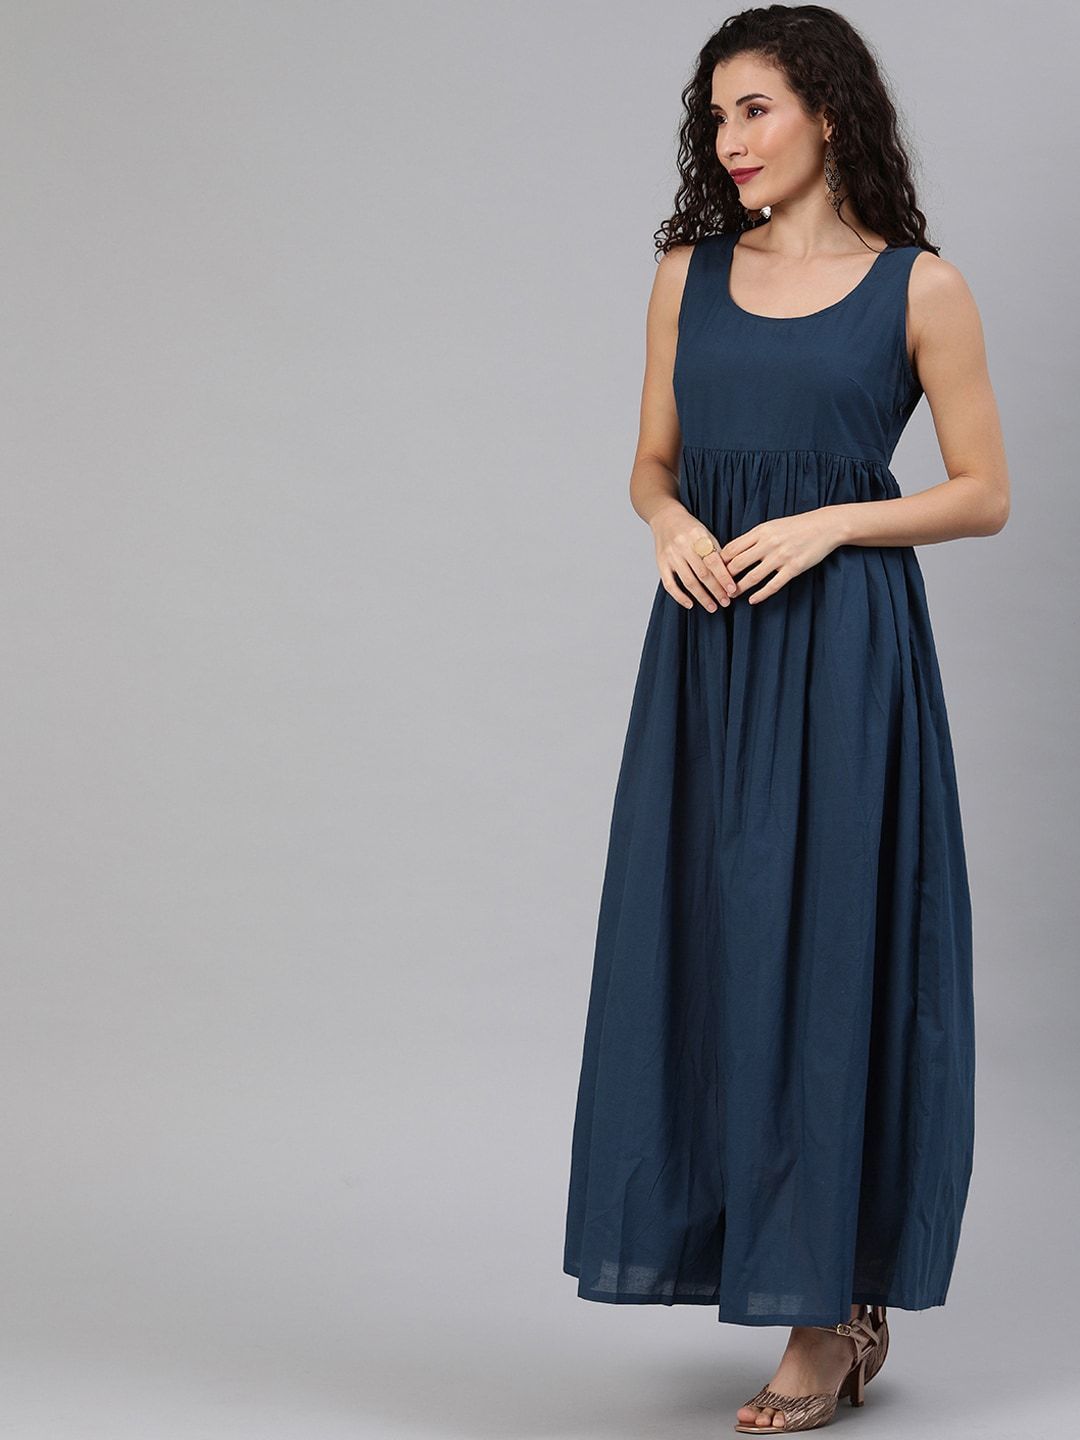 Women's  Navy Blue Solid Maxi Dress With Jacket - AKS